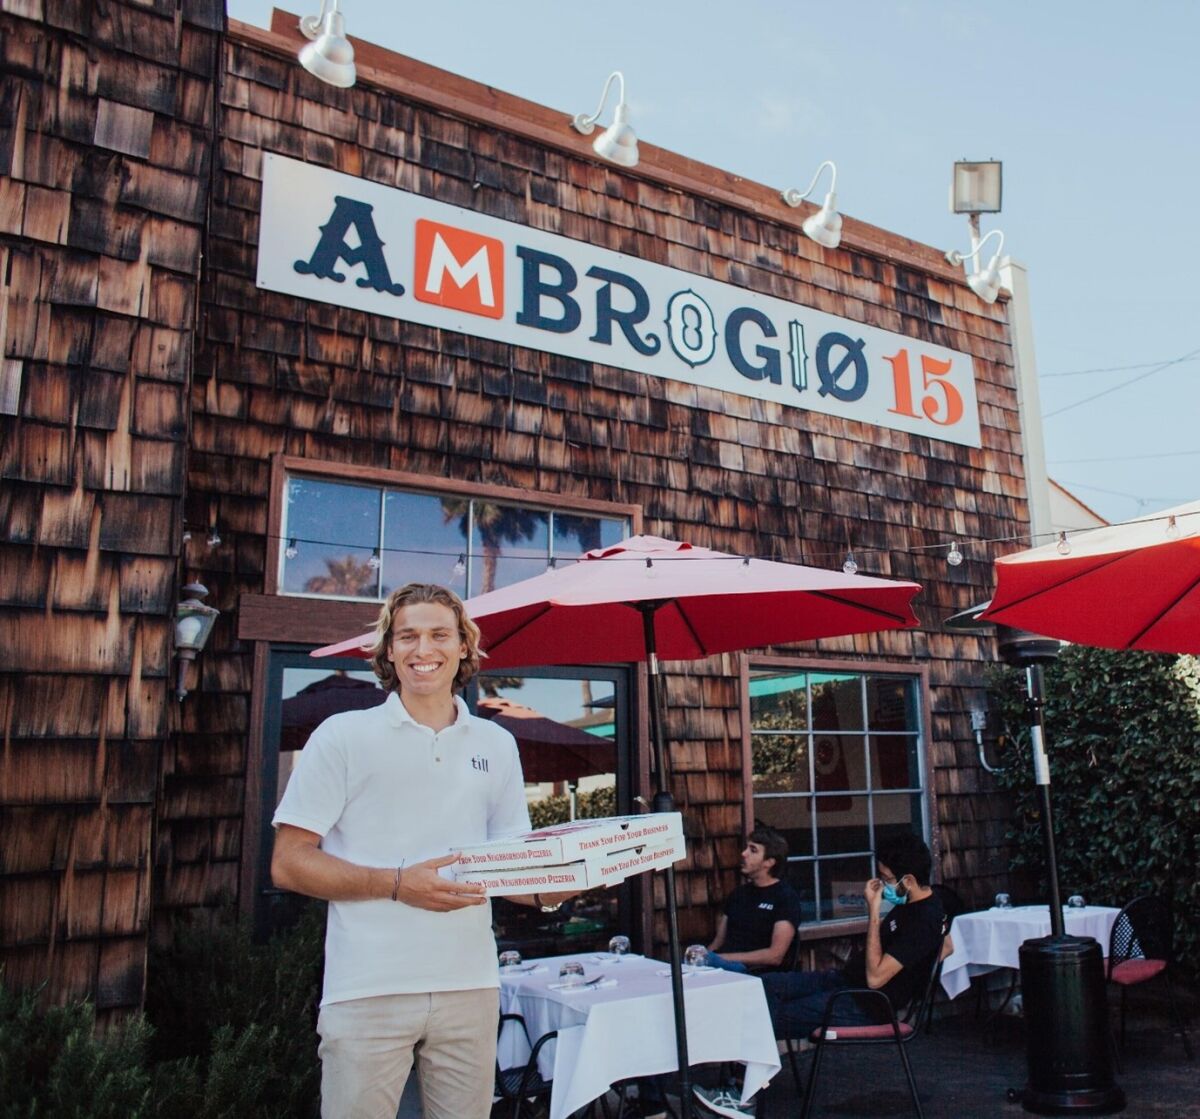 Till the App co-founder Till Hartwig in front of Ambrogio15, a participating restaurant.